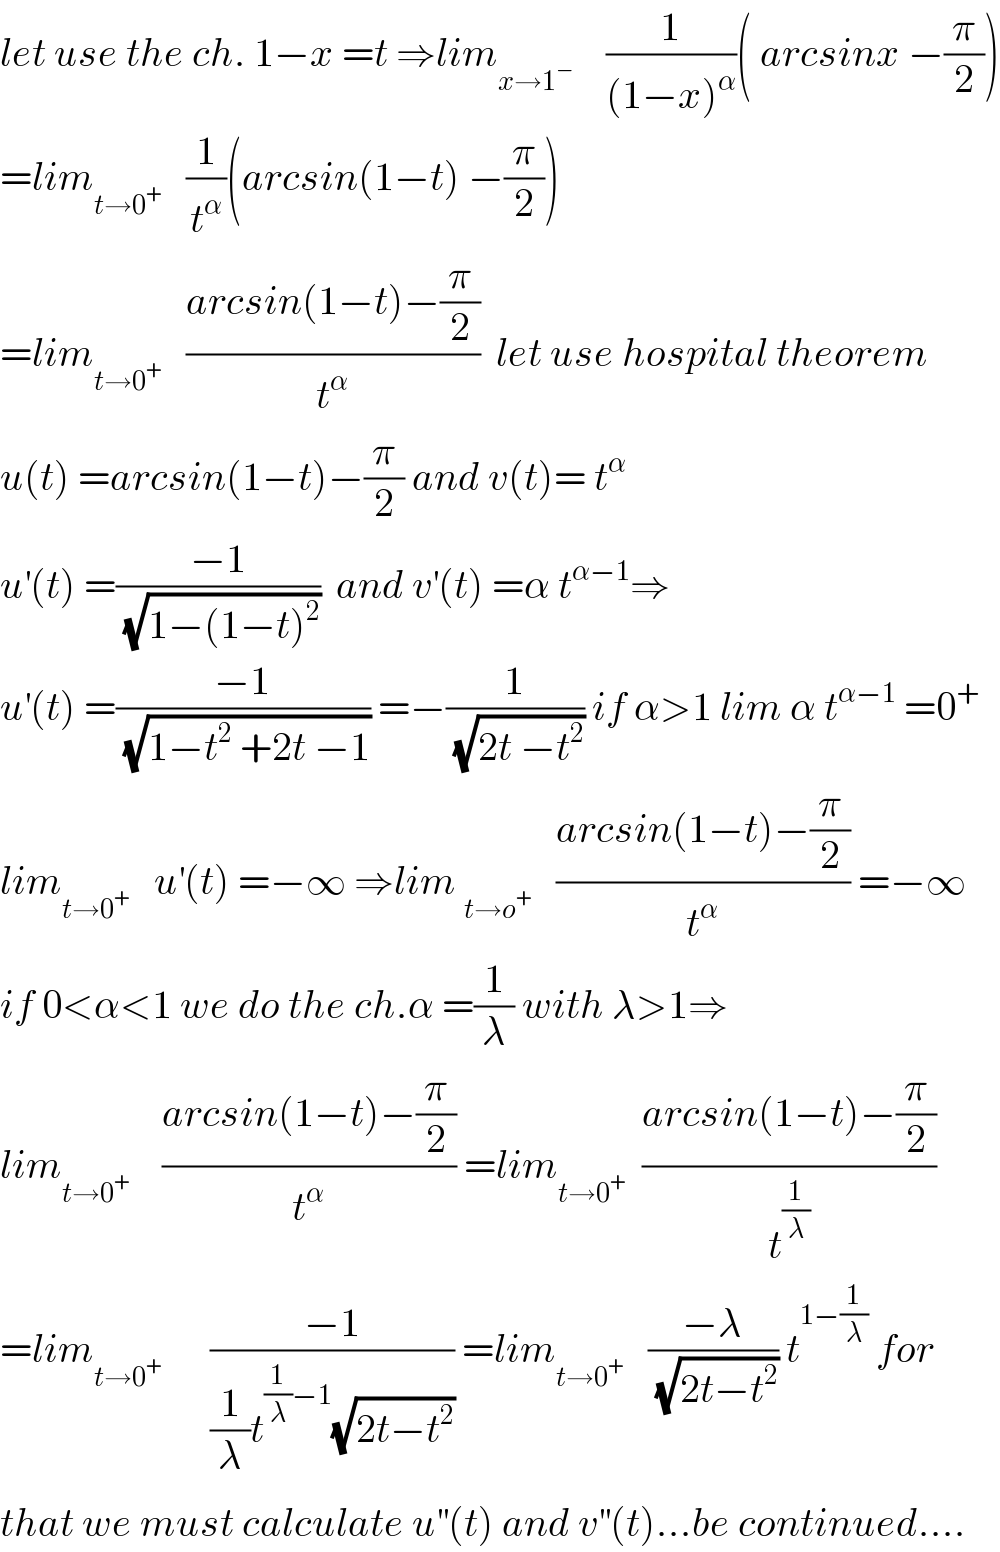 let use the ch. 1−x =t ⇒lim_(x→1^− )     (1/((1−x)^α ))( arcsinx −(π/2))  =lim_(t→0^+ )    (1/t^α )(arcsin(1−t) −(π/2))  =lim_(t→0^+ )    ((arcsin(1−t)−(π/2))/t^α )  let use hospital theorem  u(t) =arcsin(1−t)−(π/2) and v(t)= t^α   u^′ (t) =((−1)/(√(1−(1−t)^2 )))  and v^′ (t) =α t^(α−1) ⇒  u^′ (t) =((−1)/(√(1−t^2  +2t −1))) =−(1/(√(2t −t^2 ))) if α>1 lim α t^(α−1)  =0^+   lim_(t→0^+ )    u^′ (t) =−∞ ⇒lim _(t→o^+ )    ((arcsin(1−t)−(π/2))/t^α ) =−∞  if 0<α<1 we do the ch.α =(1/λ) with λ>1⇒  lim_(t→0^+ )     ((arcsin(1−t)−(π/2))/t^α ) =lim_(t→0^+ )   ((arcsin(1−t)−(π/2))/t^(1/λ) )  =lim_(t→0^+ )       ((−1)/((1/λ)t^((1/λ)−1) (√(2t−t^2 )))) =lim_(t→0^+ )    ((−λ)/(√(2t−t^2 ))) t^(1−(1/λ))  for  that we must calculate u^(′′) (t) and v^(′′) (t)...be continued....  